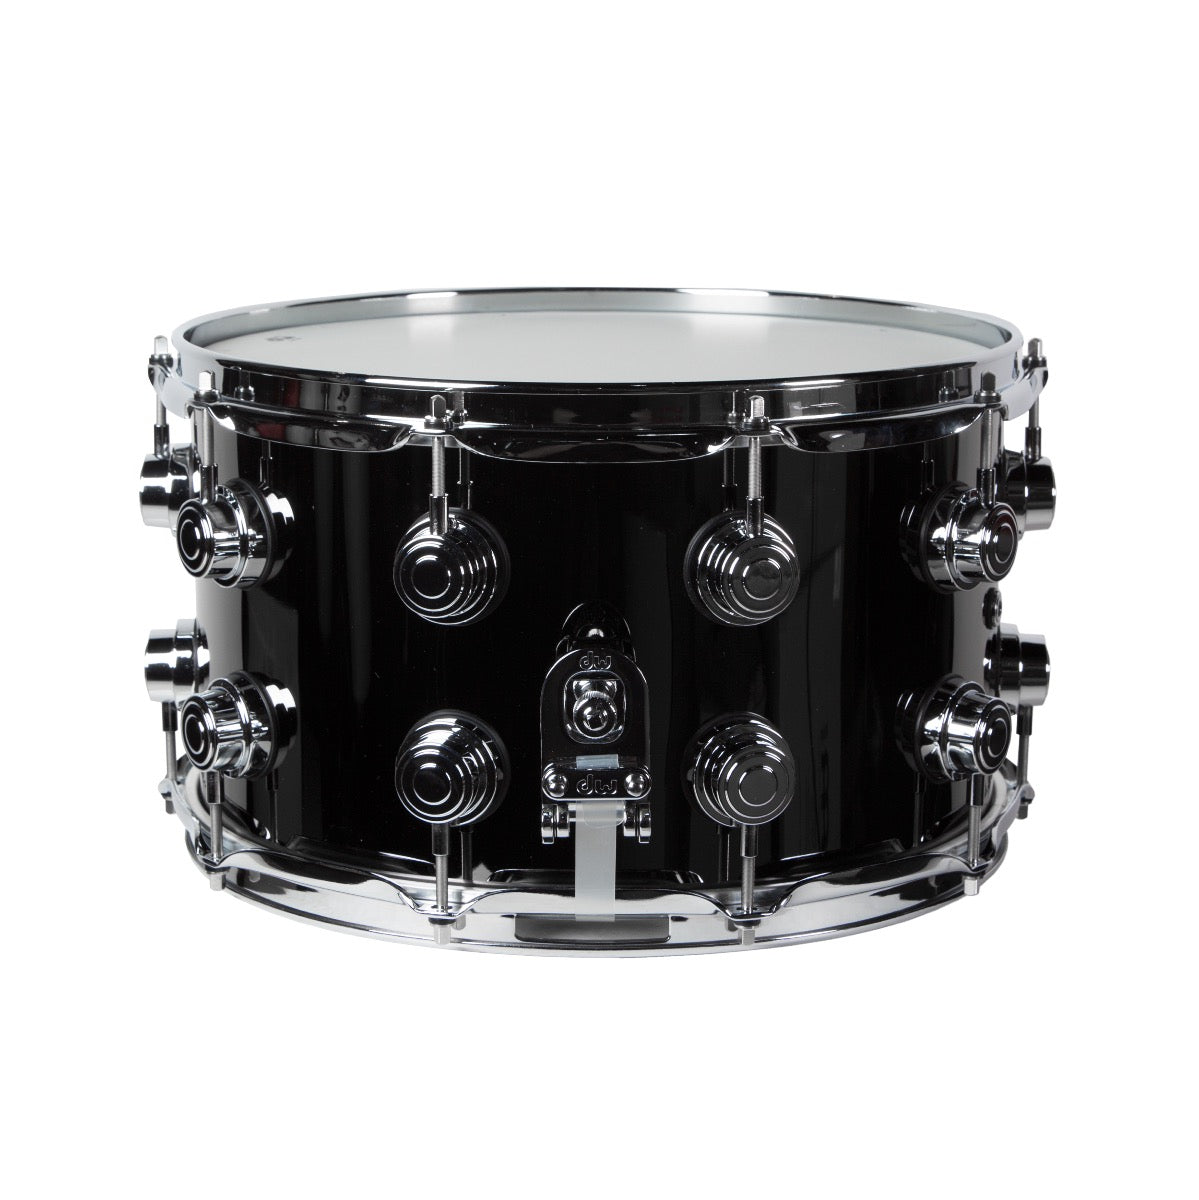 DW 14x8 Collectors Series Black Nickel Finish on Brass Shell Snare